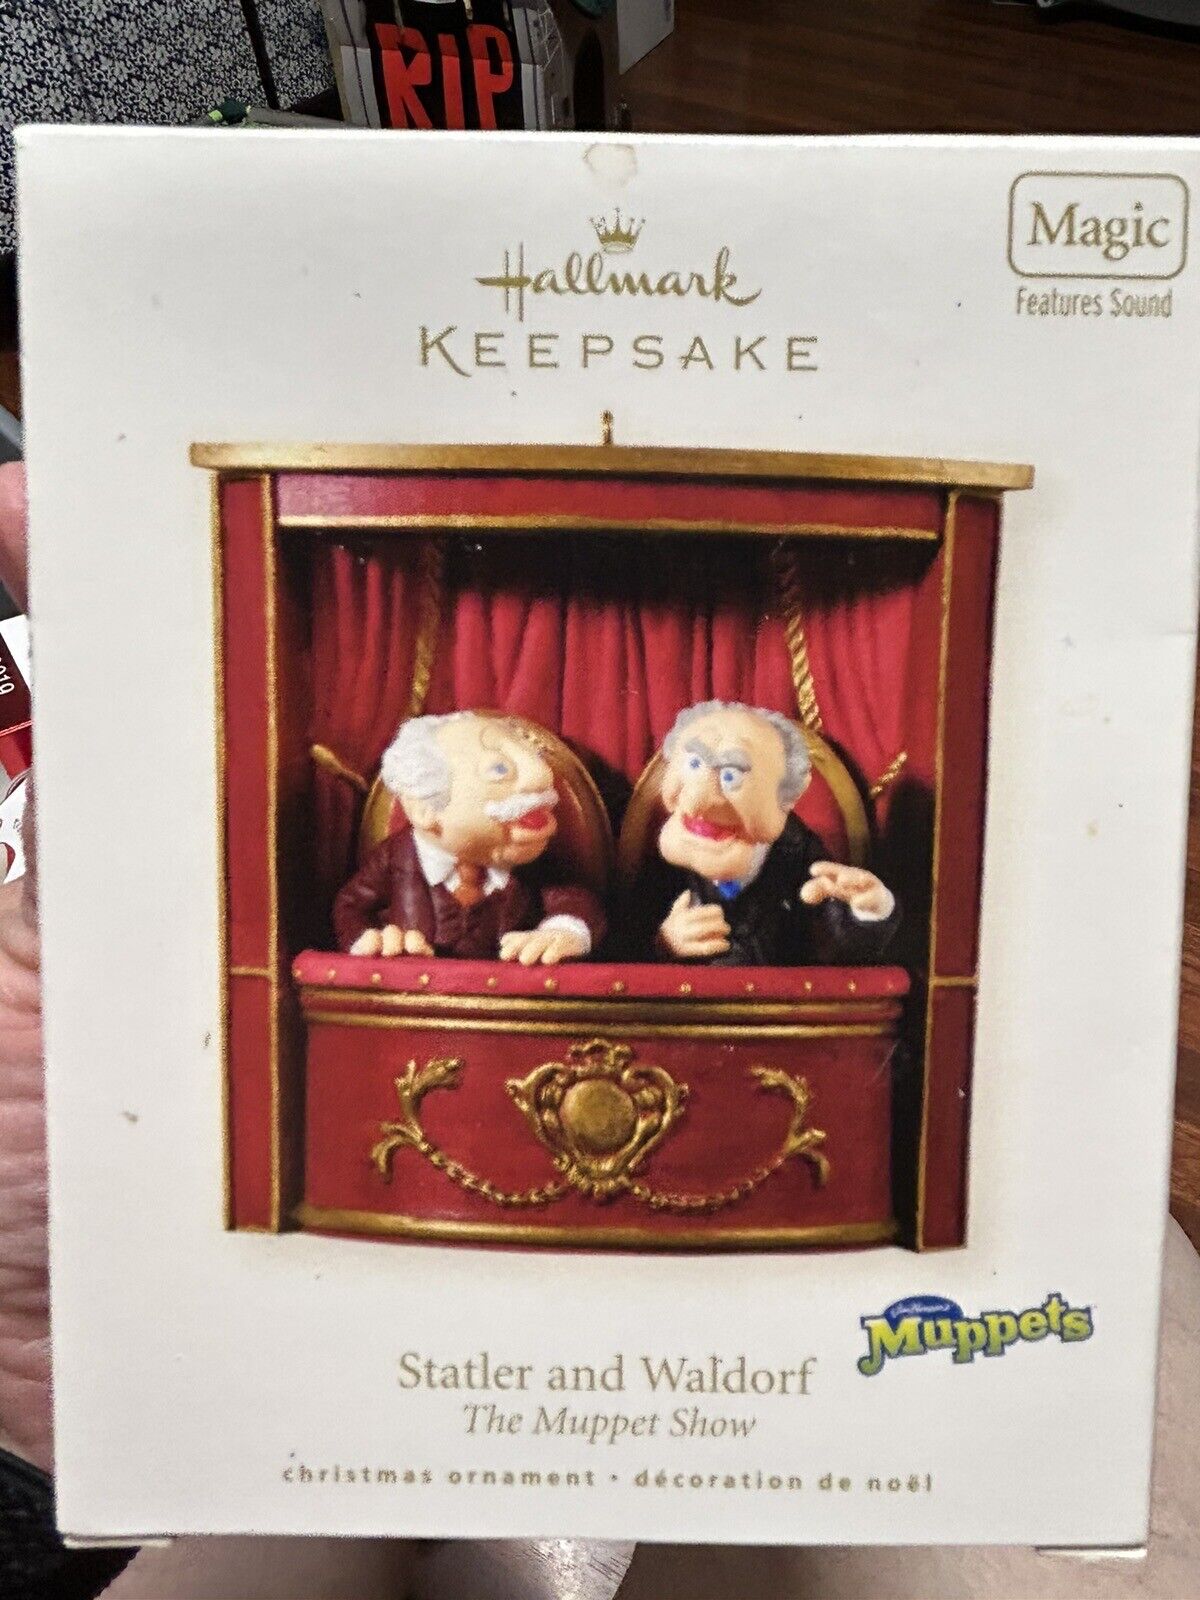 Hallmark Statler and Waldorf The Muppet Show 2008 Christmas Ornament - Tested